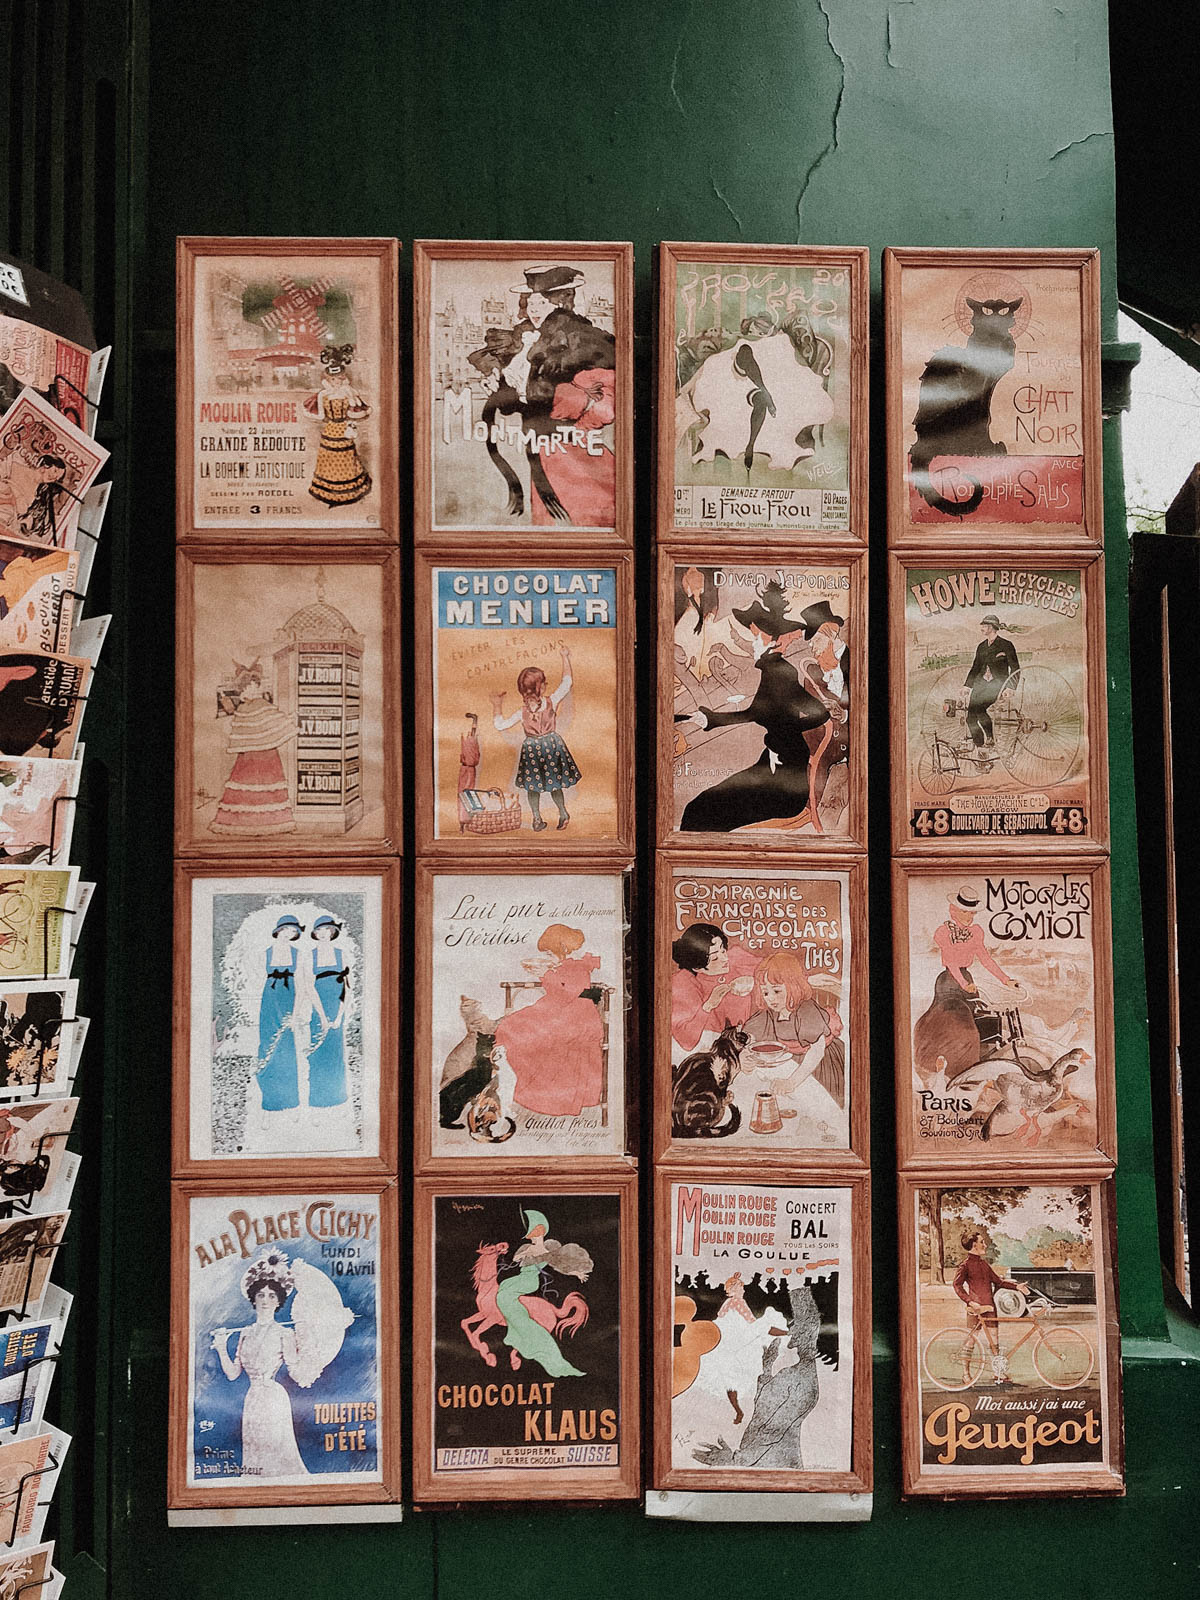 Paris France Travel Guide - Shopping Vintage French Prints / RG Daily Blog